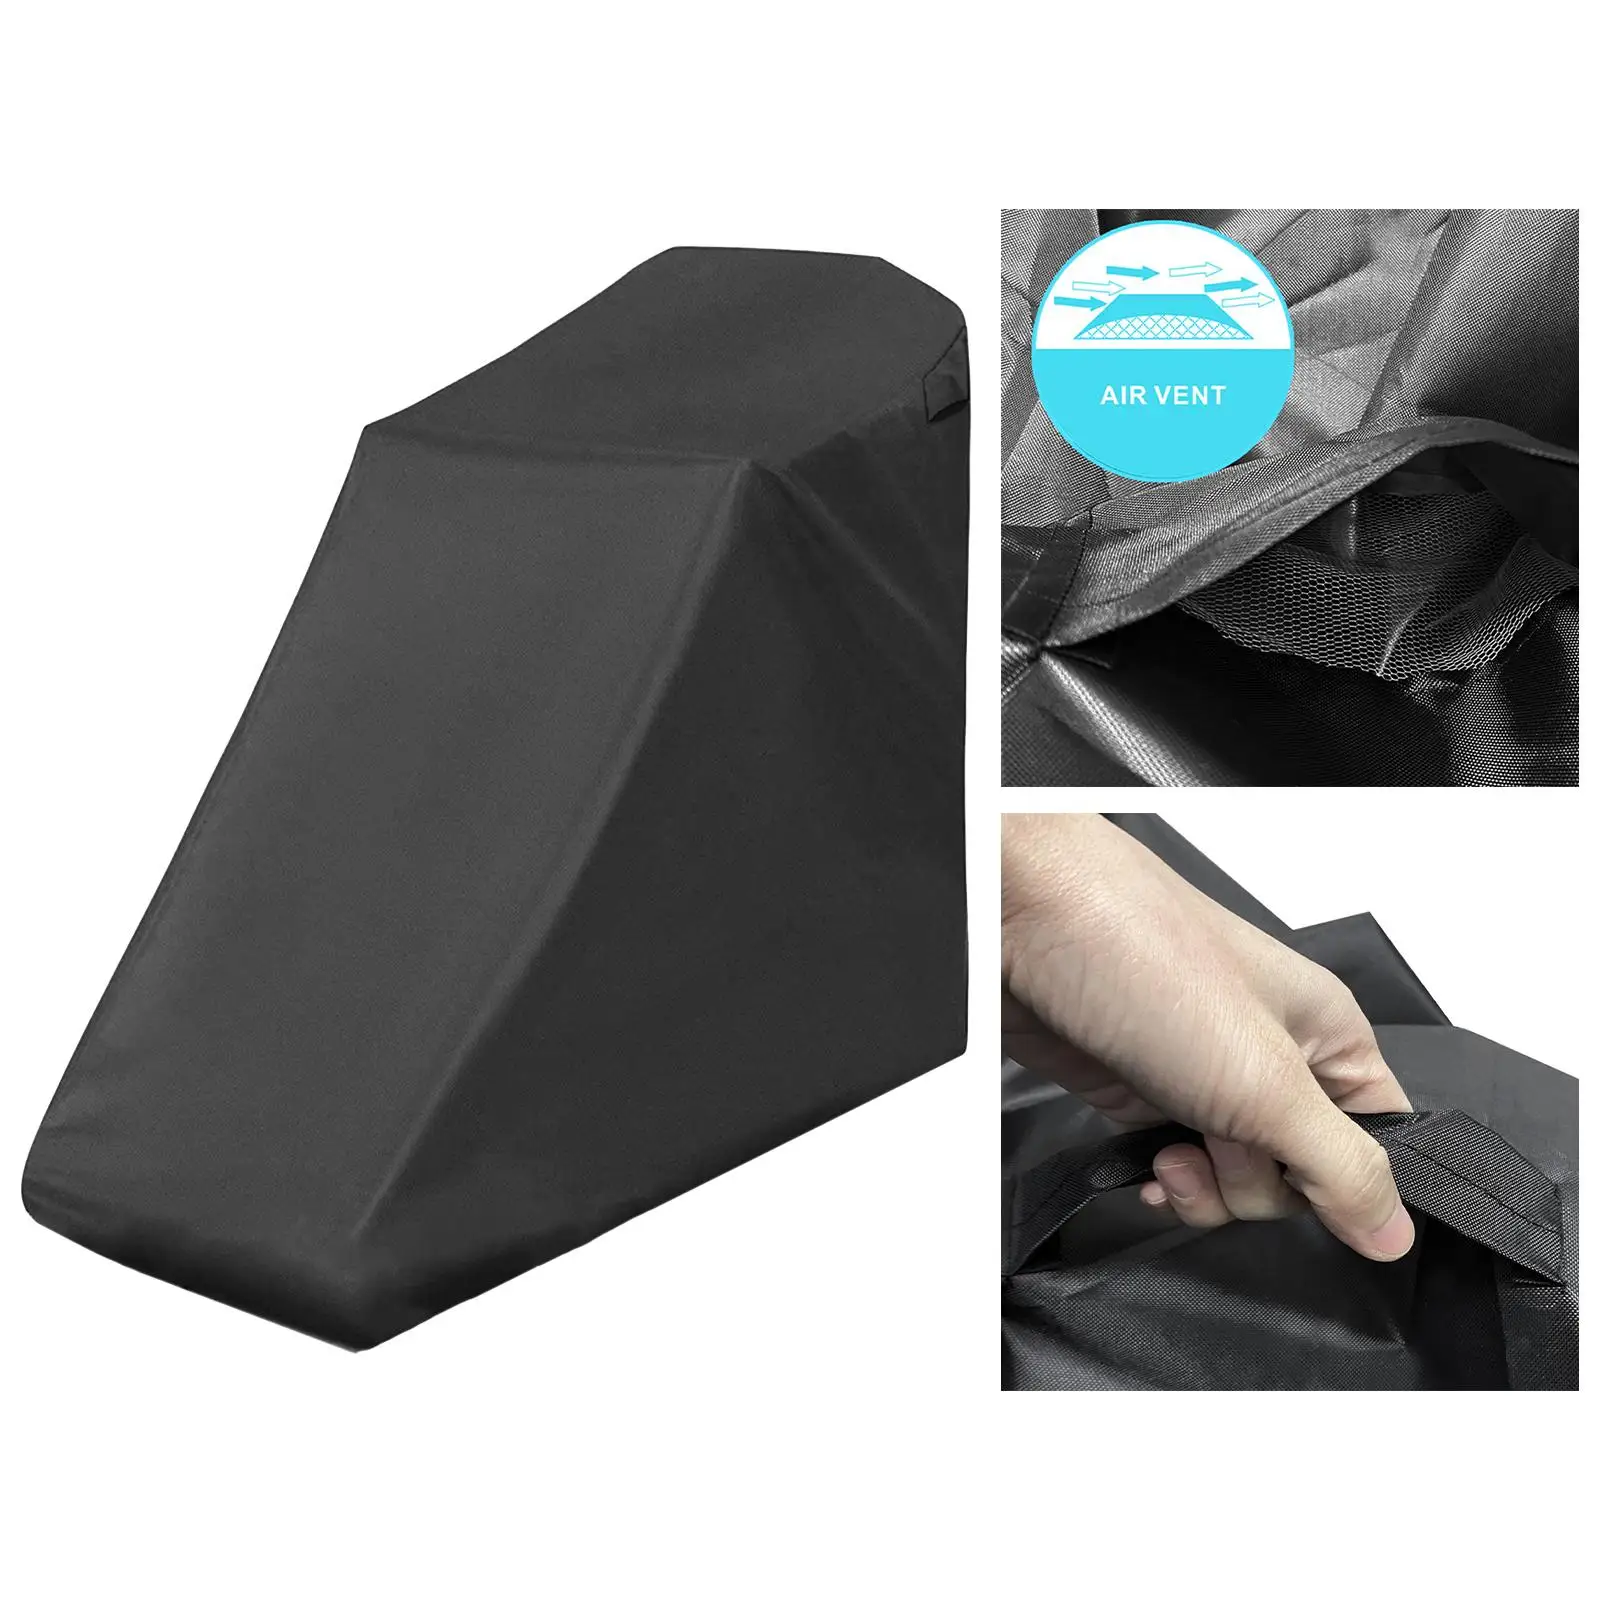 Treadmill Cover Running Machine Cover Oxford Cloth Indoor Exercise Workout Equipment Dust Covers for Home